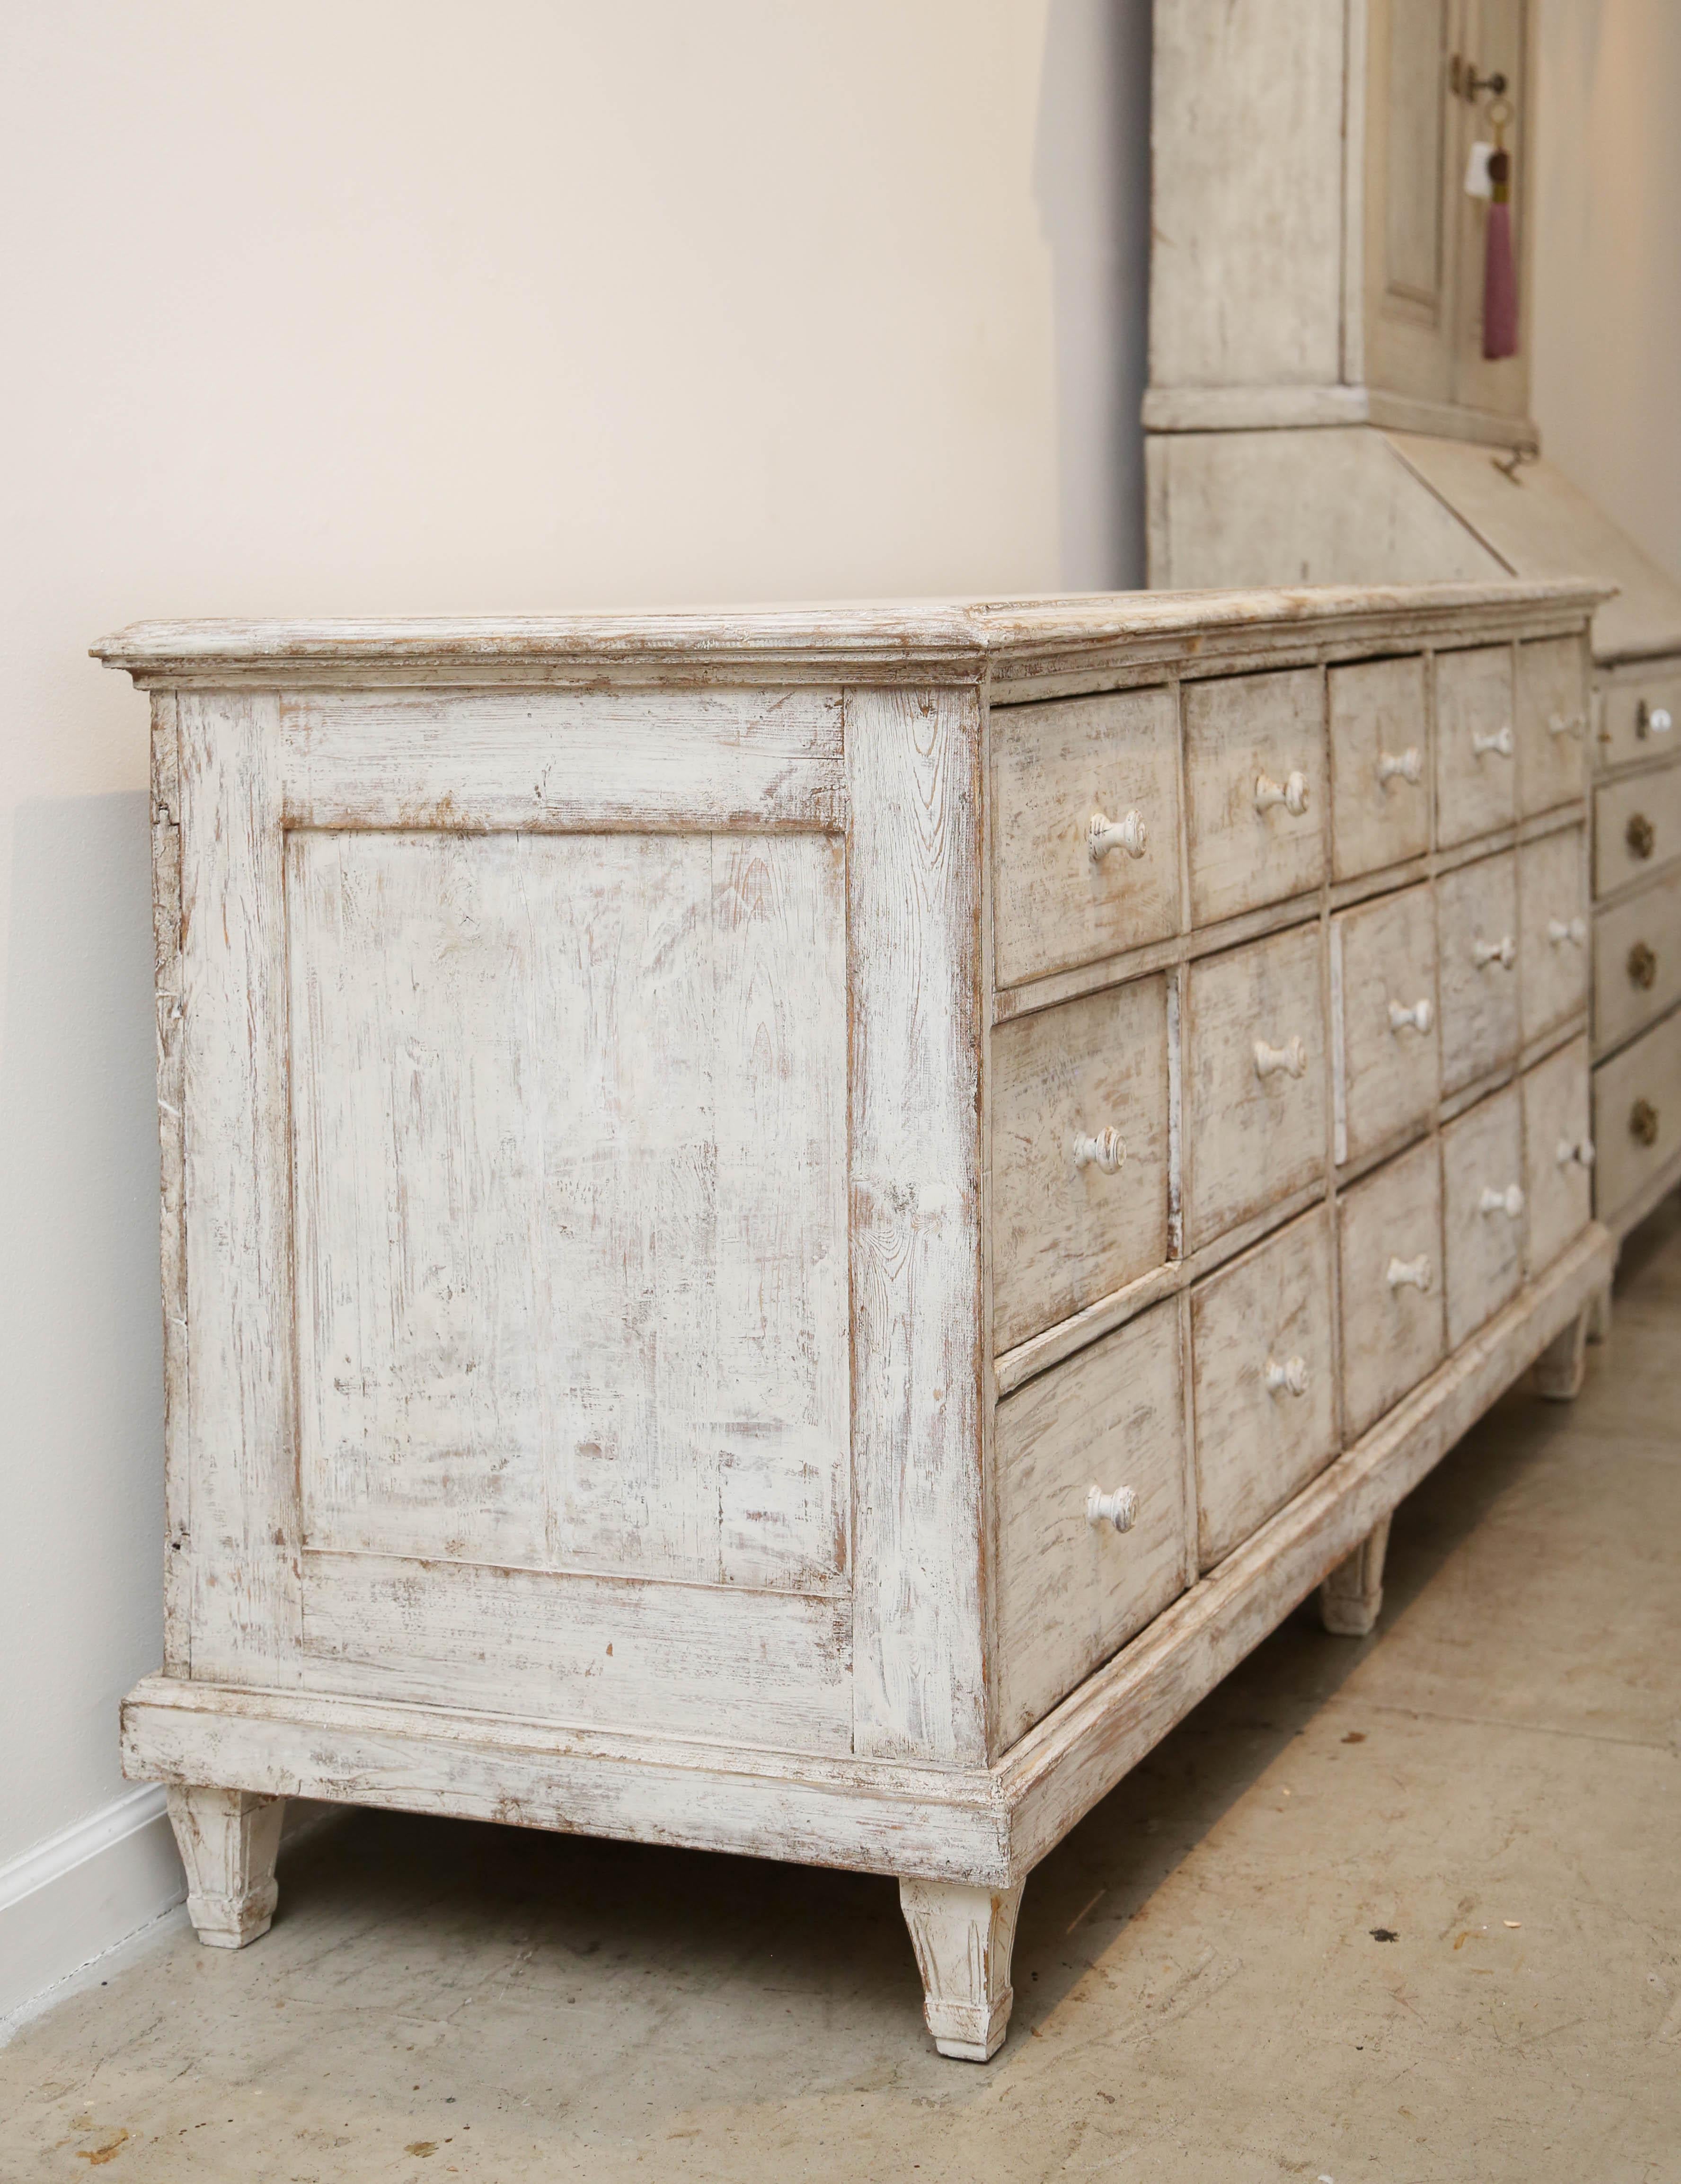 Antique Swedish Painted Apothecary Cabinet or Sideboard, Mid-19th Century For Sale 2